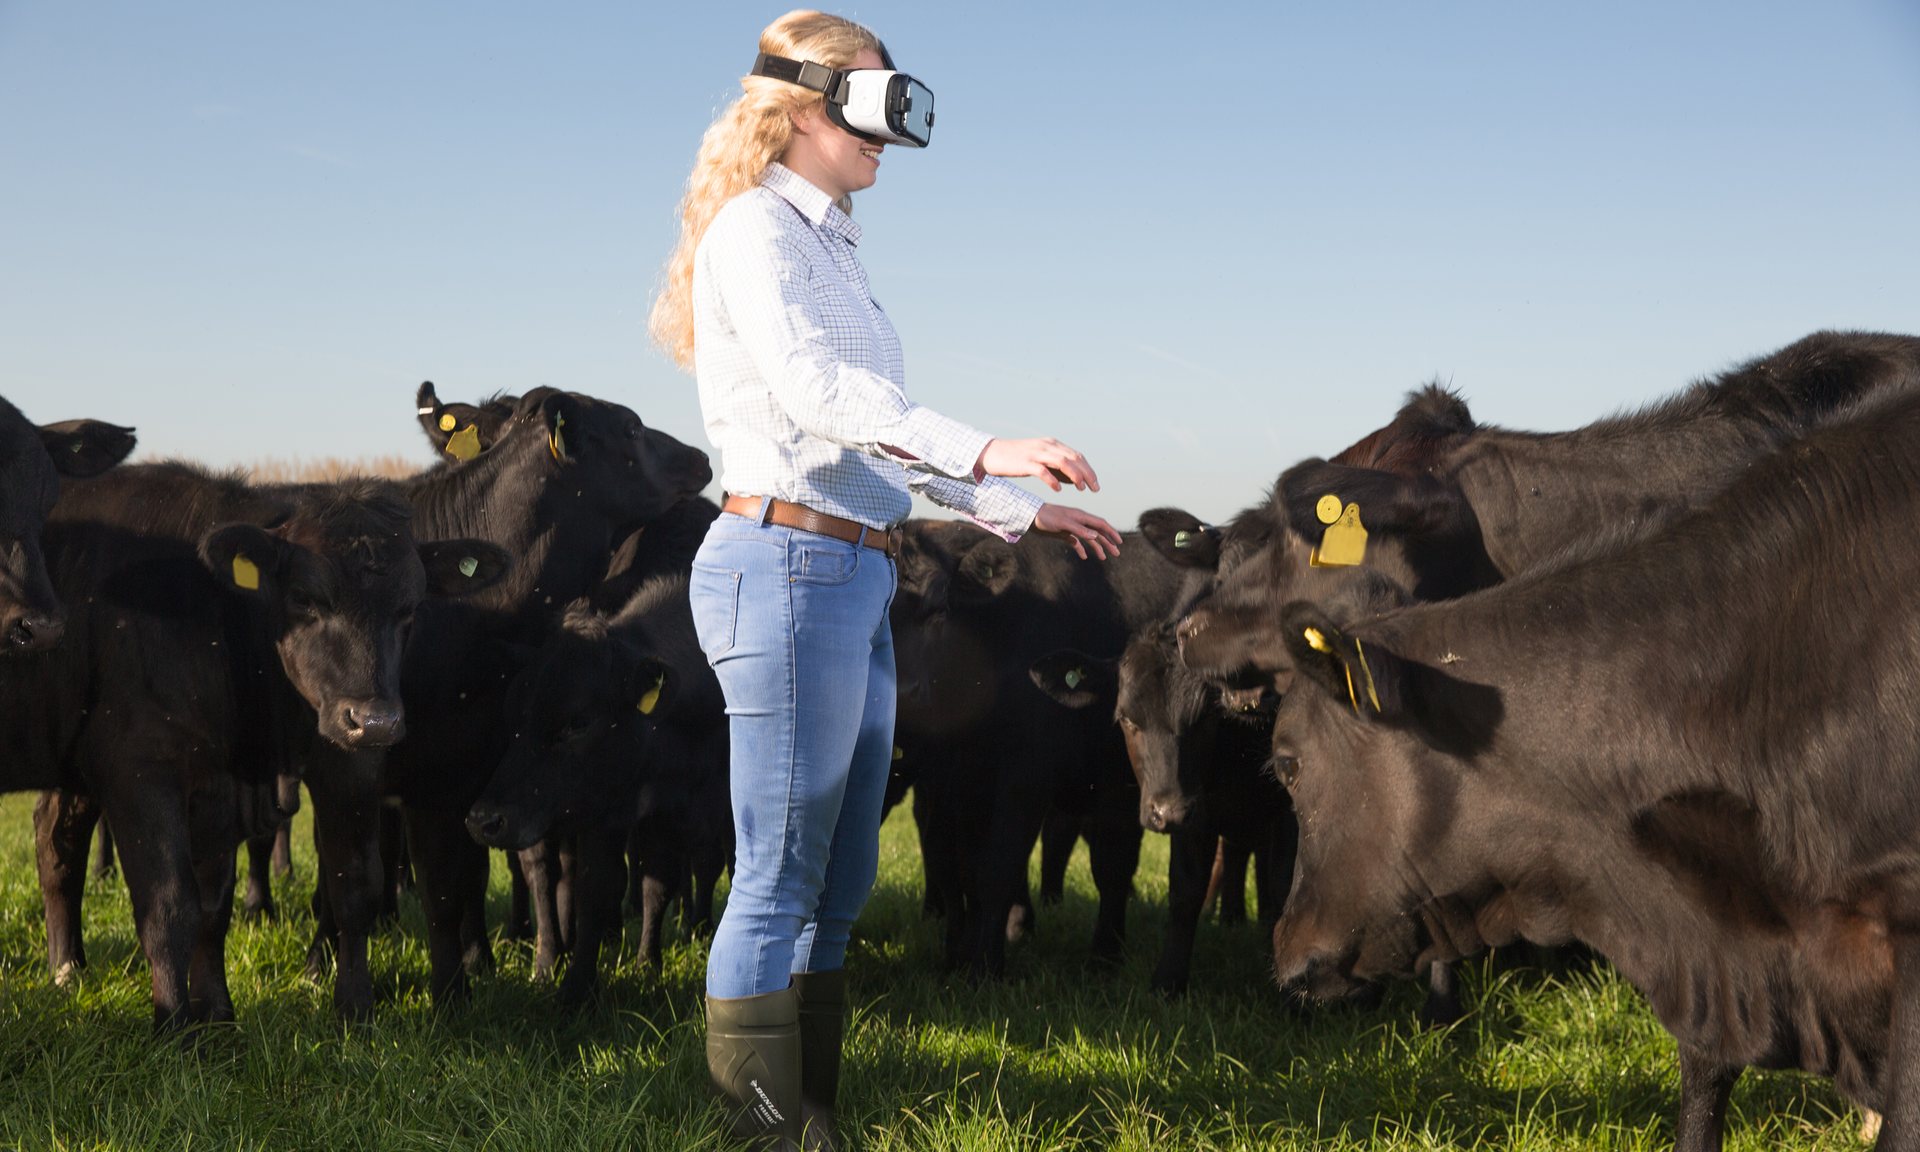 Fast food chain plans roadshow of agricultural shows around UK to connect consumers with modern farming realities